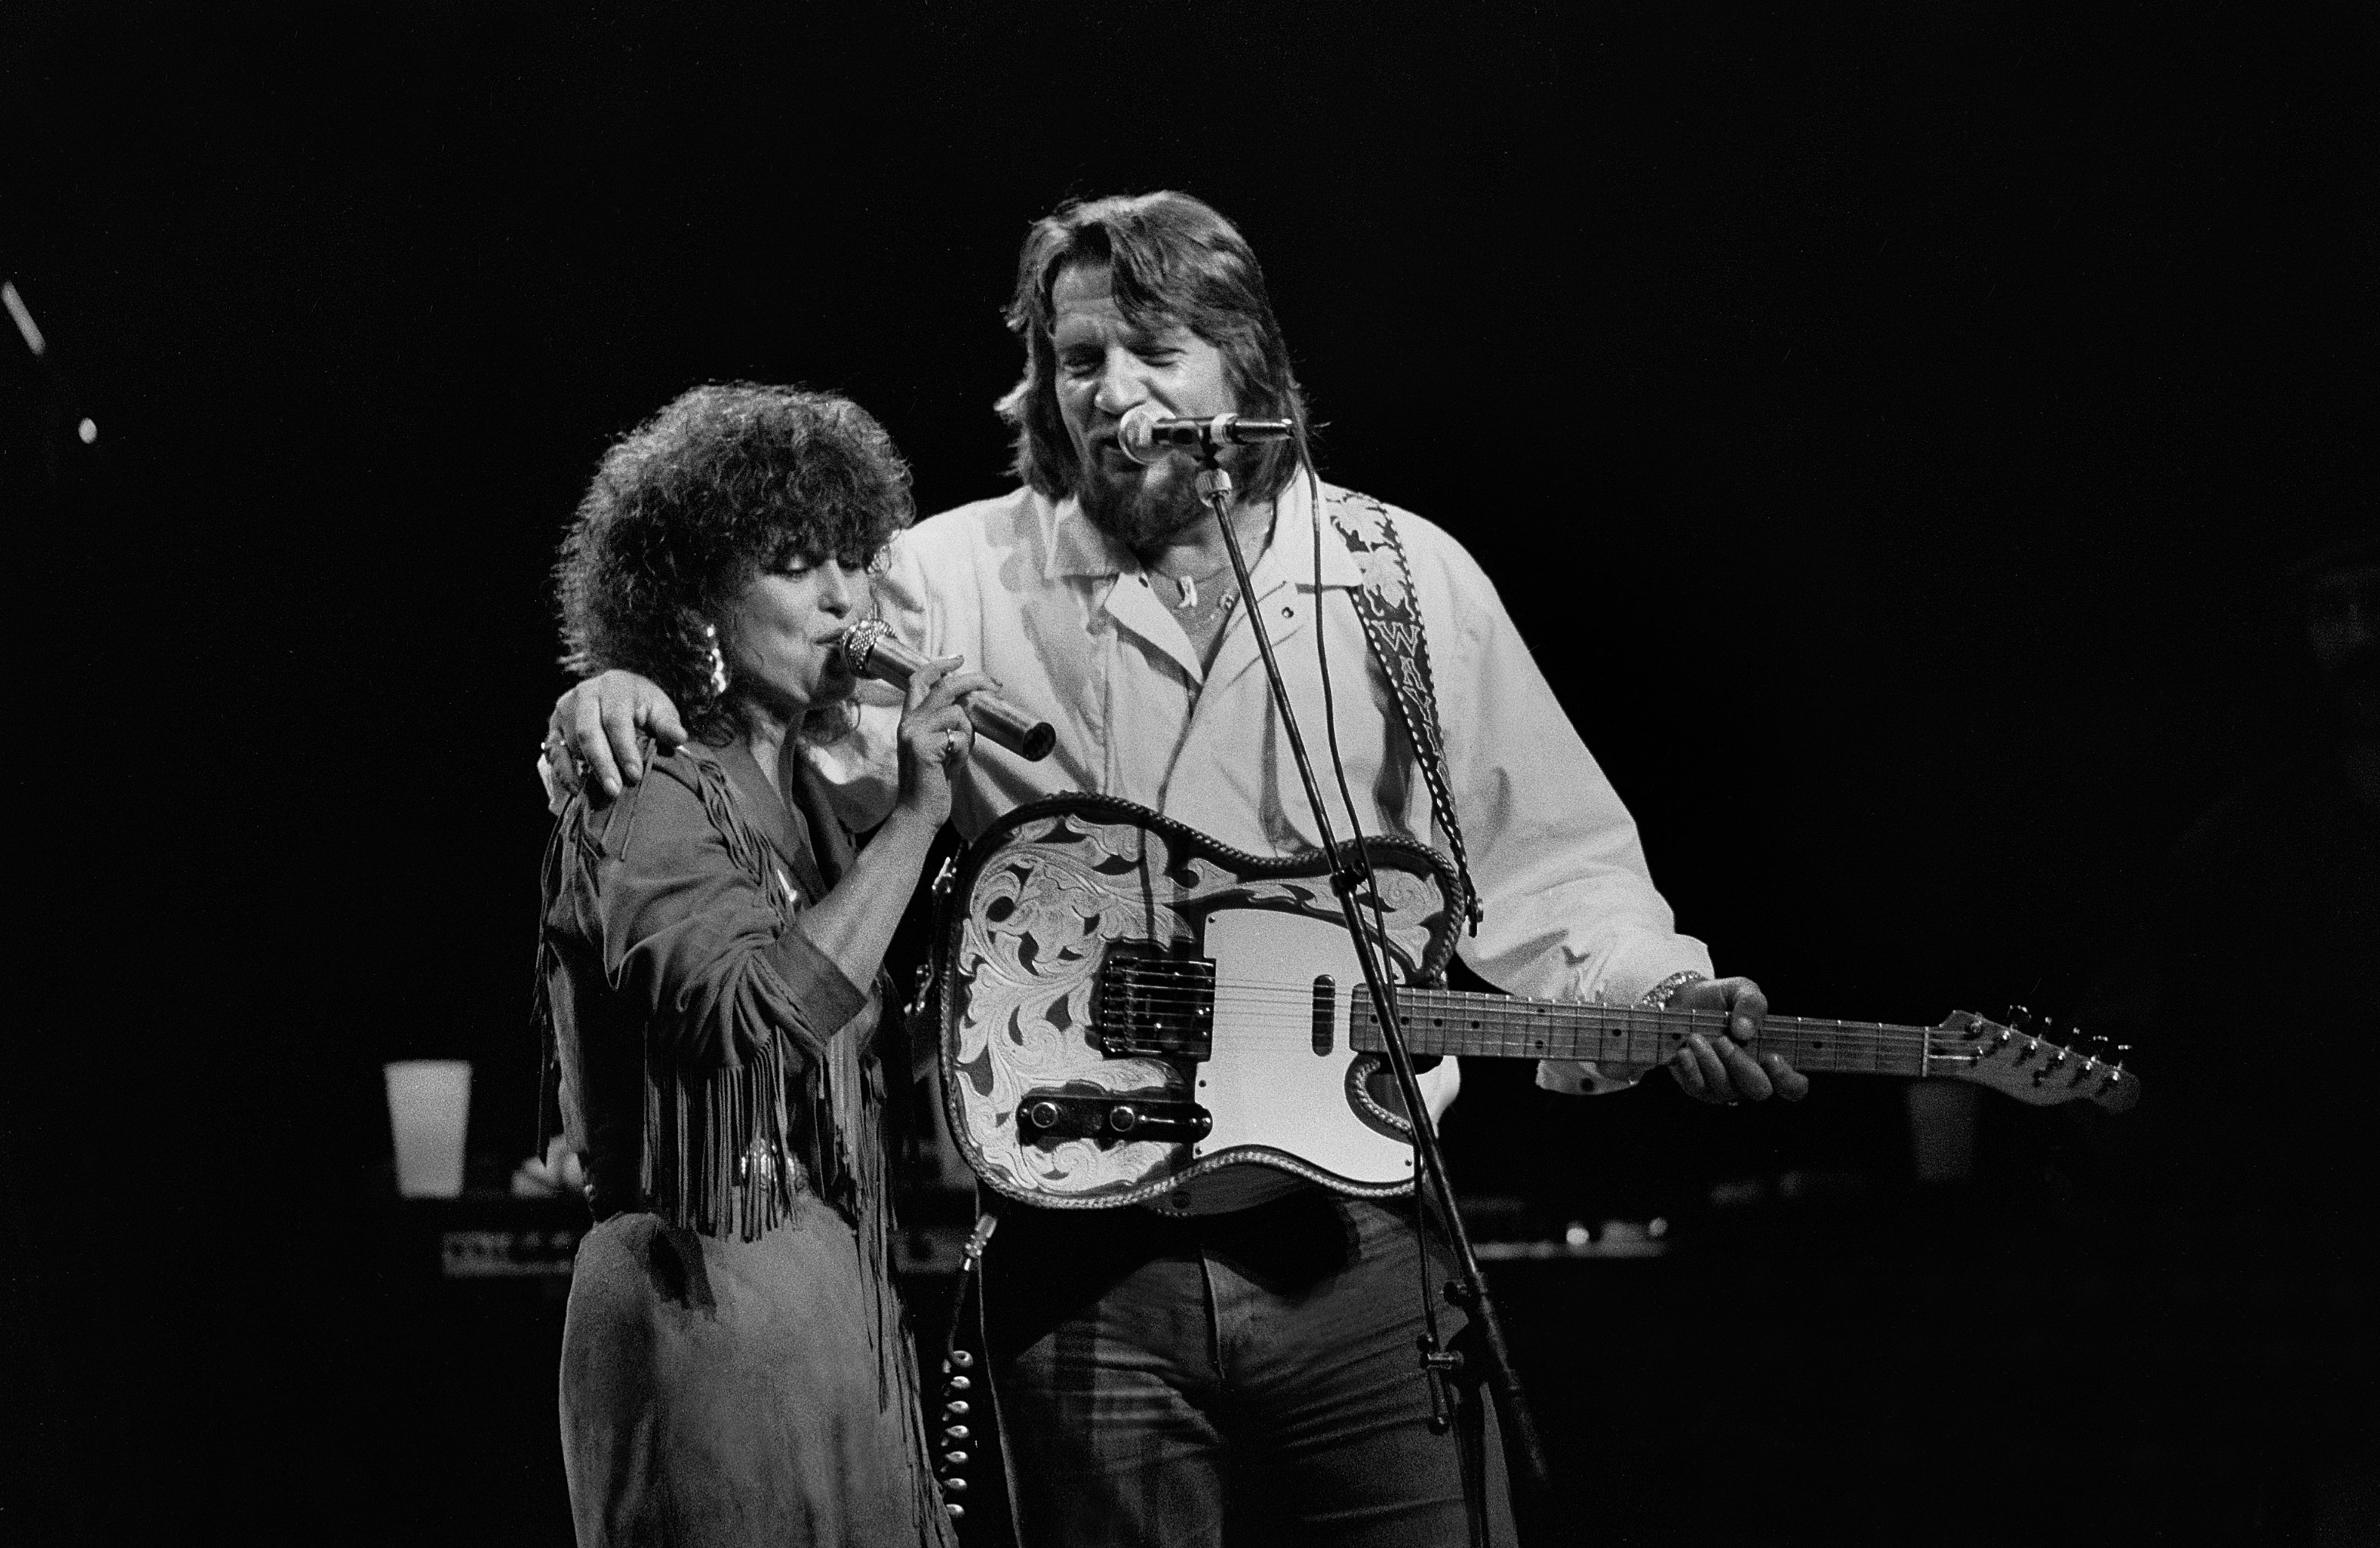 Jessi Colter and Waylon Jennings perform onstage at the Poplar Creek Music Theater in Hoffman Estates, Illinois, on September 3, 1984. | Source: Getty Images